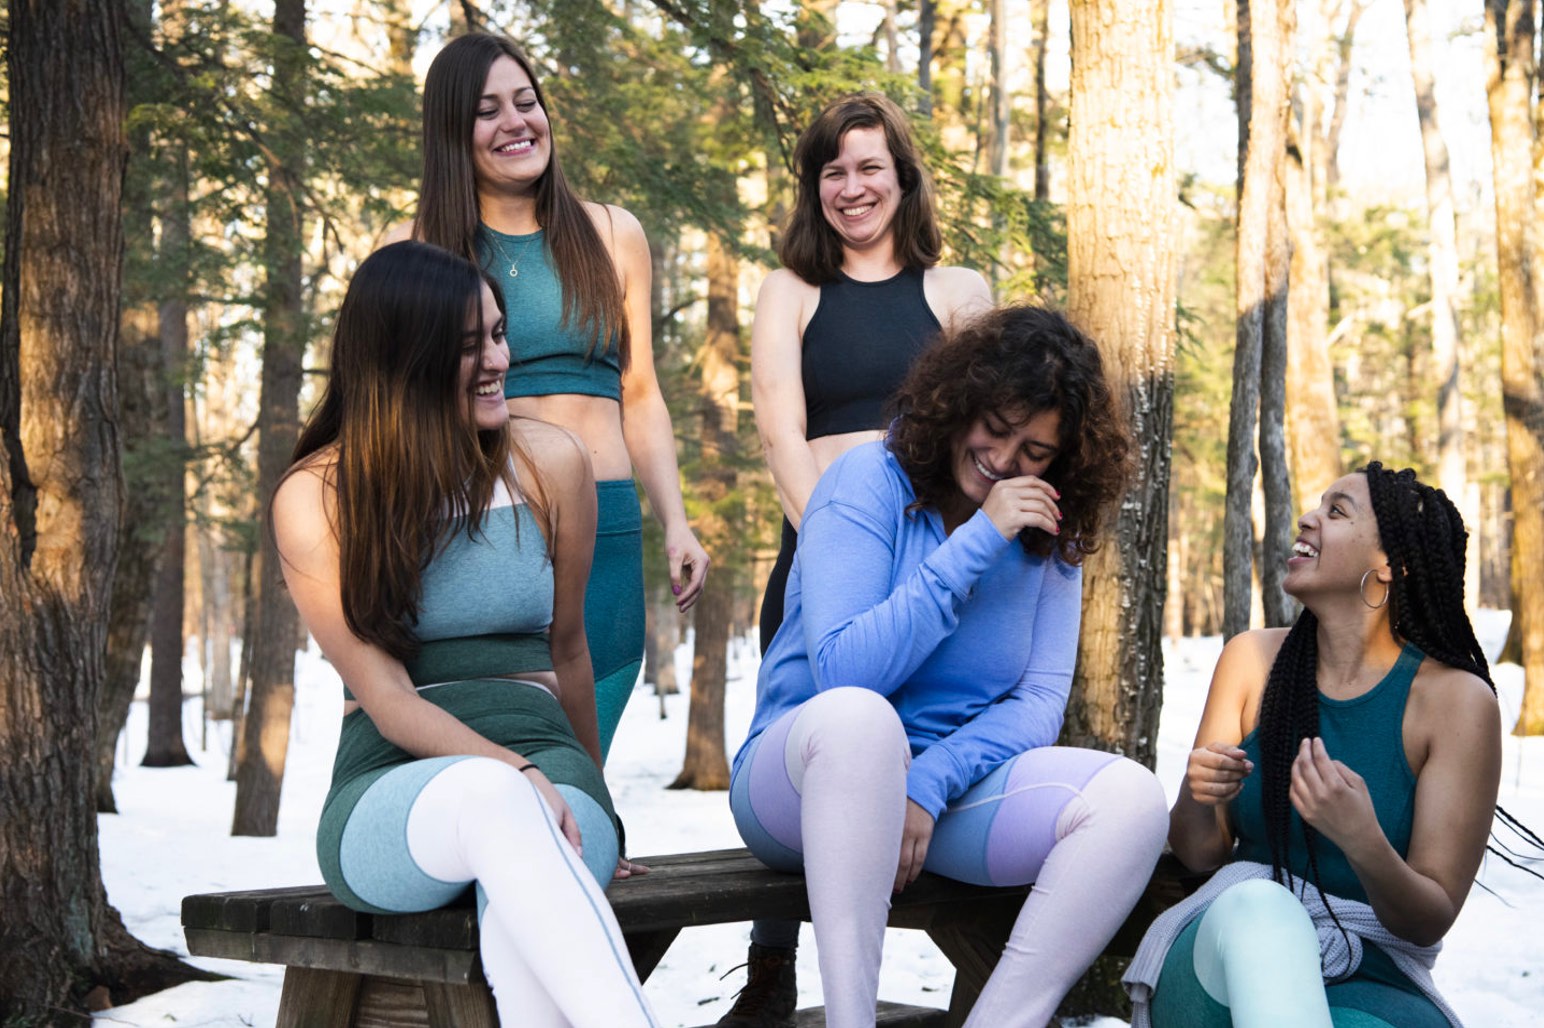 Five women wearing athletic wear laughing on a picnic table in the woods. Snow is on the ground.